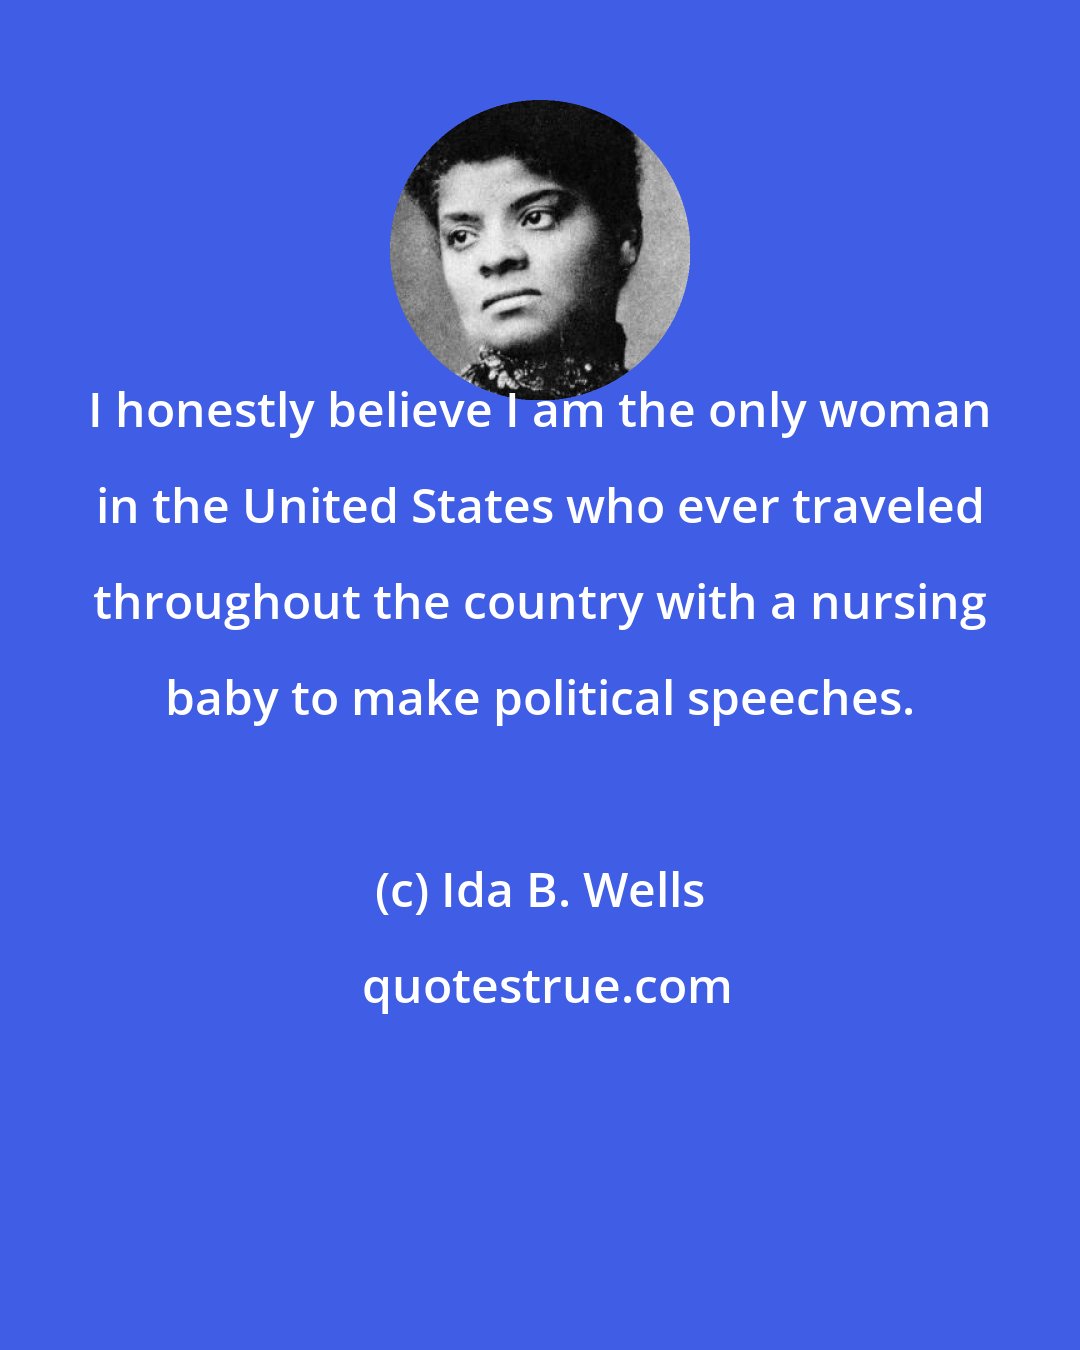 Ida B. Wells: I honestly believe I am the only woman in the United States who ever traveled throughout the country with a nursing baby to make political speeches.